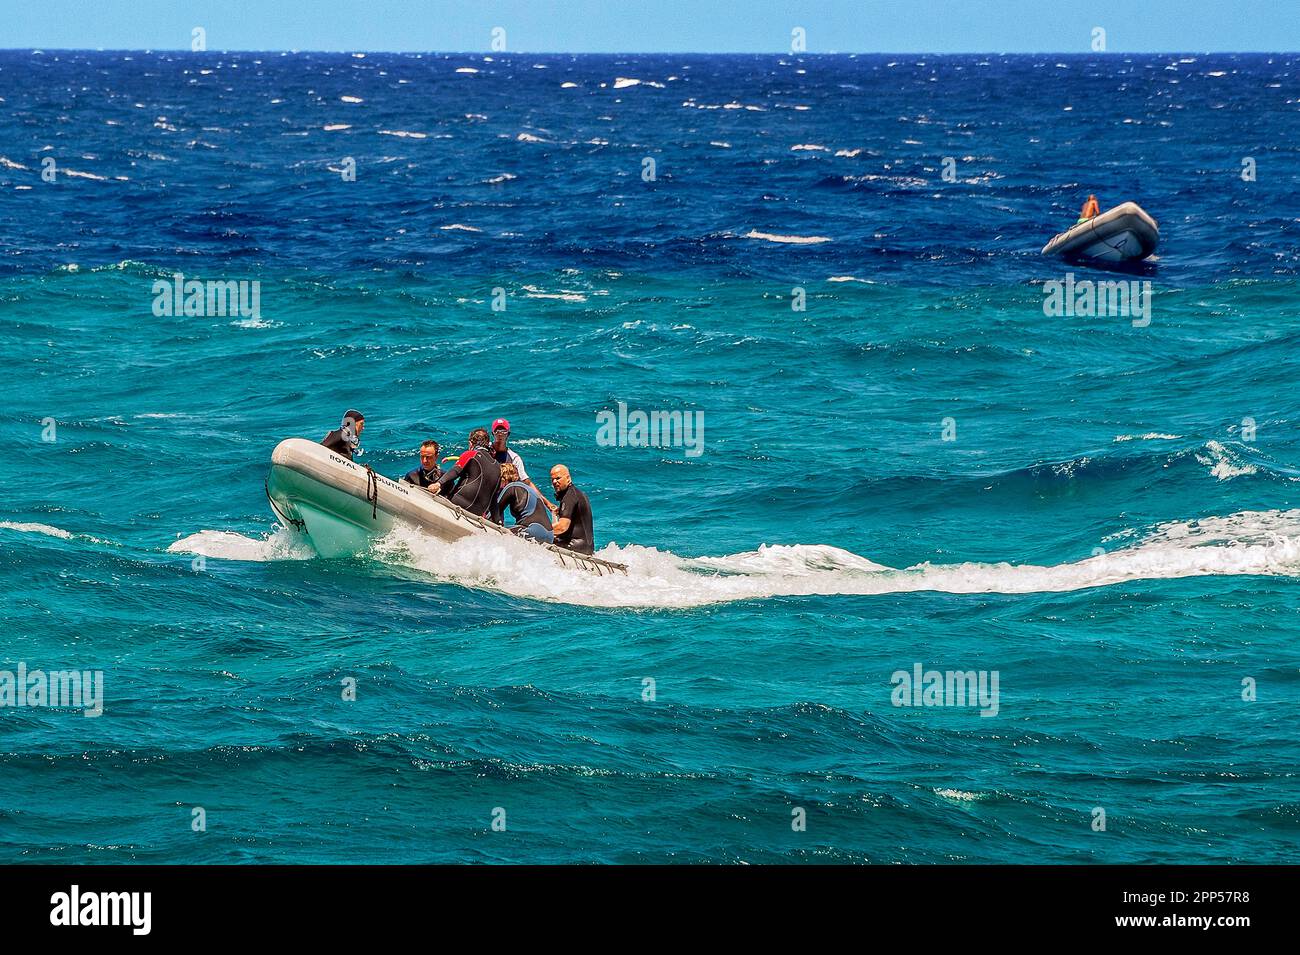 Rubber dinghies with divers in turquoise and blue water on Sanganeb Reef, National Park near Port Sudan, Unesco World Heritage Site, Sudan Stock Photo